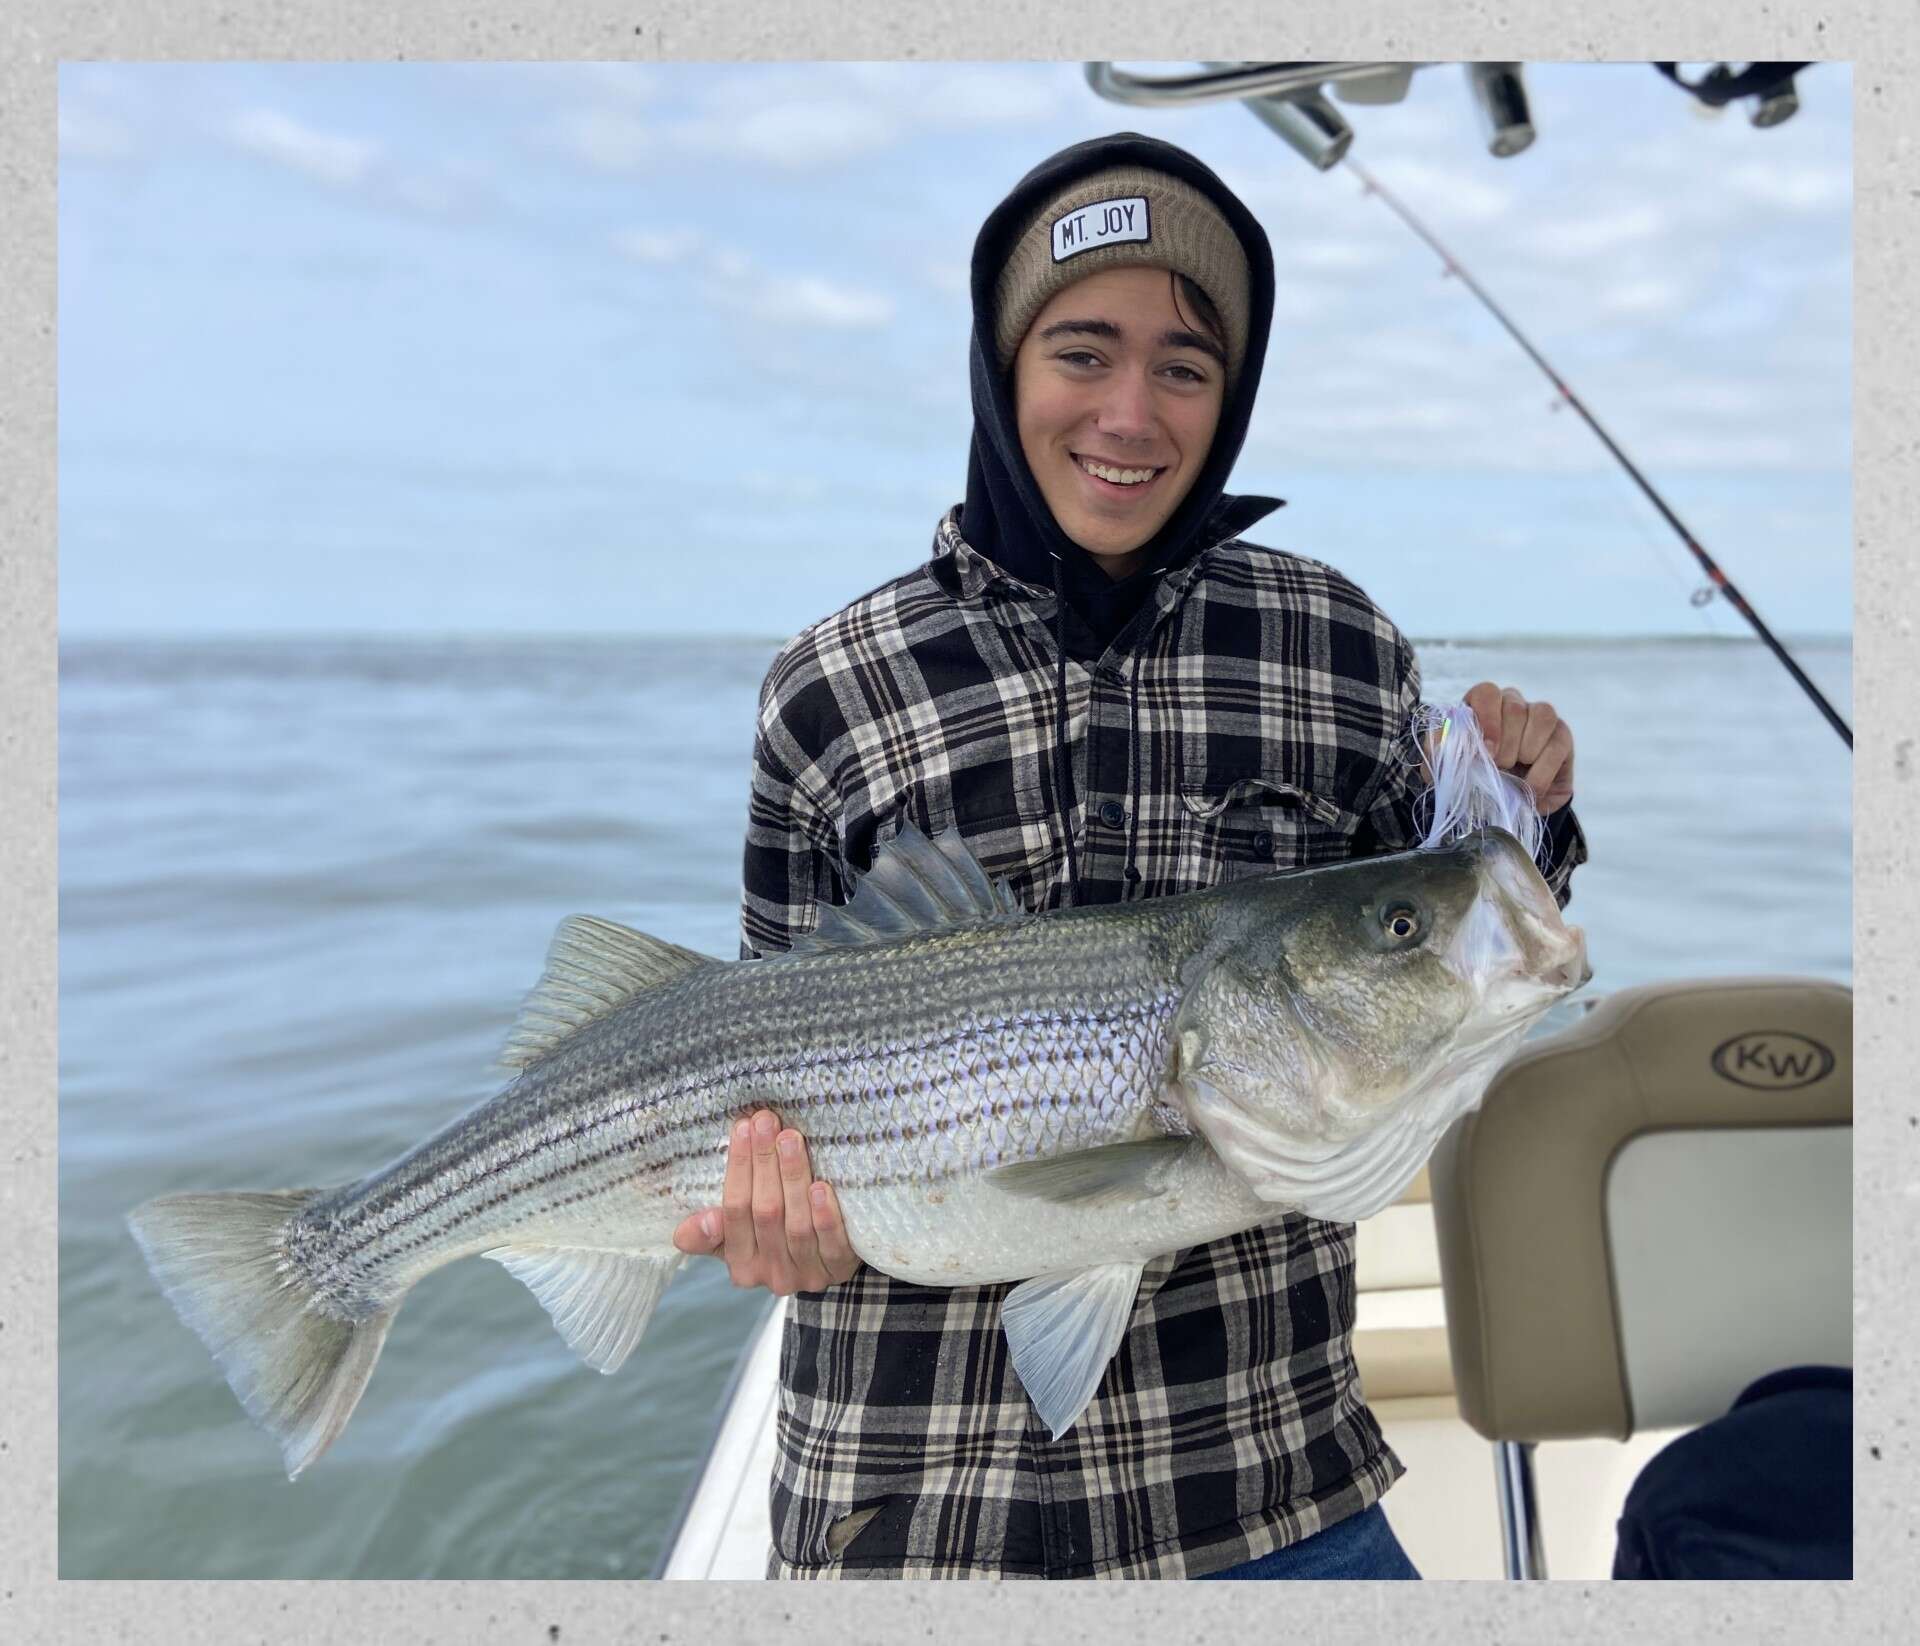 Shelter In Place Or Fishing In Place? [Blackpoint Marina Striper Fishing] 